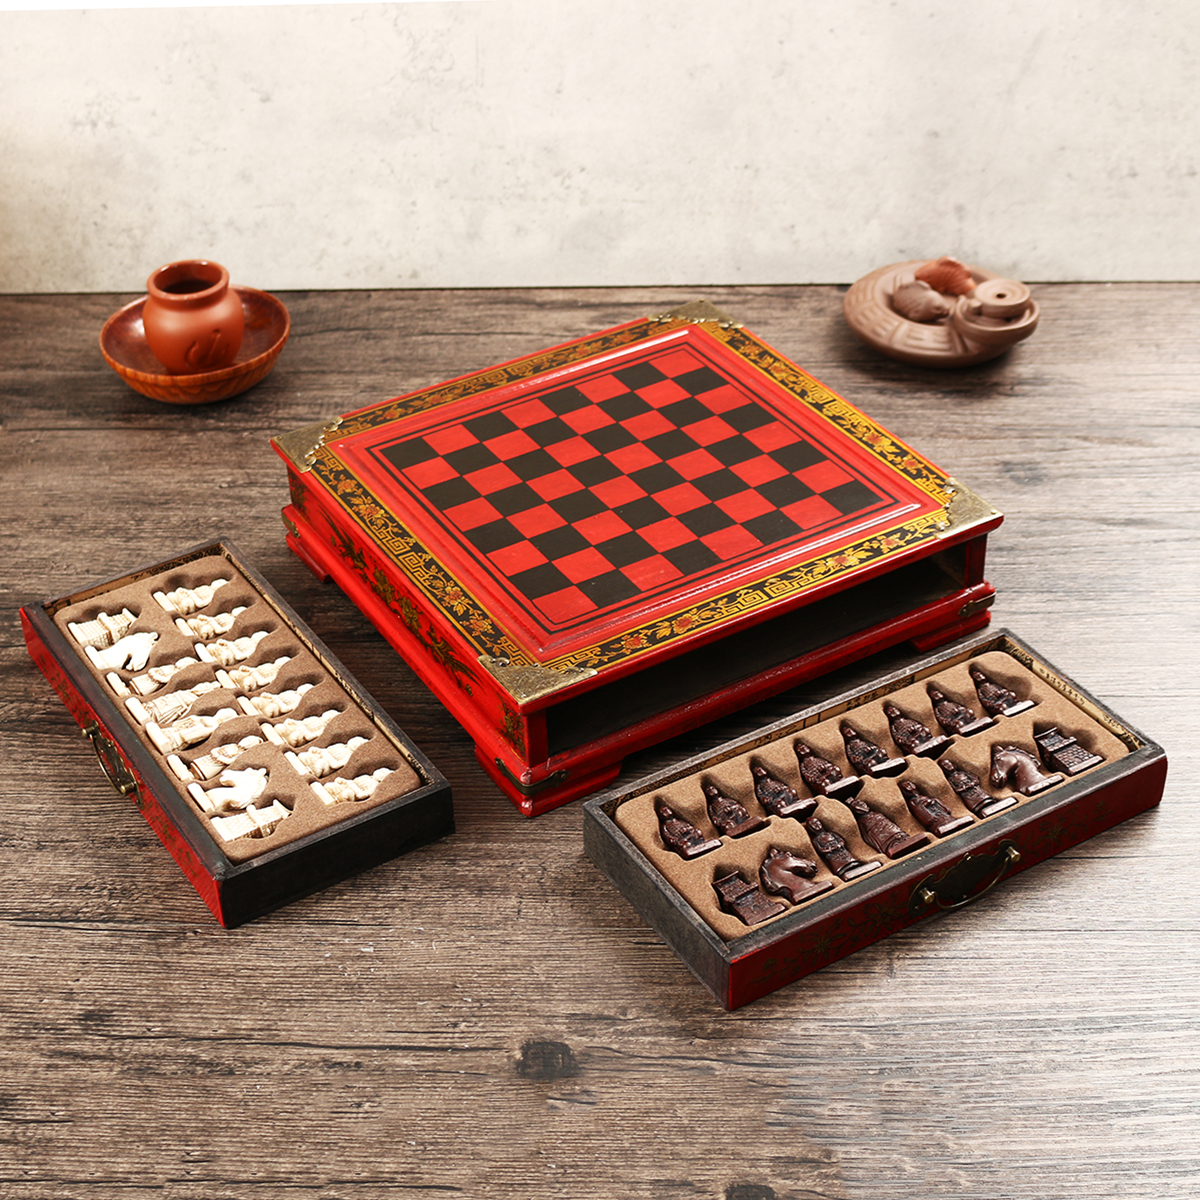 Vintage-Wooden-Chinese-Chess-Board-Table-Game-Set-Pieces-Gift-Toy-Collectibles-1454841-4